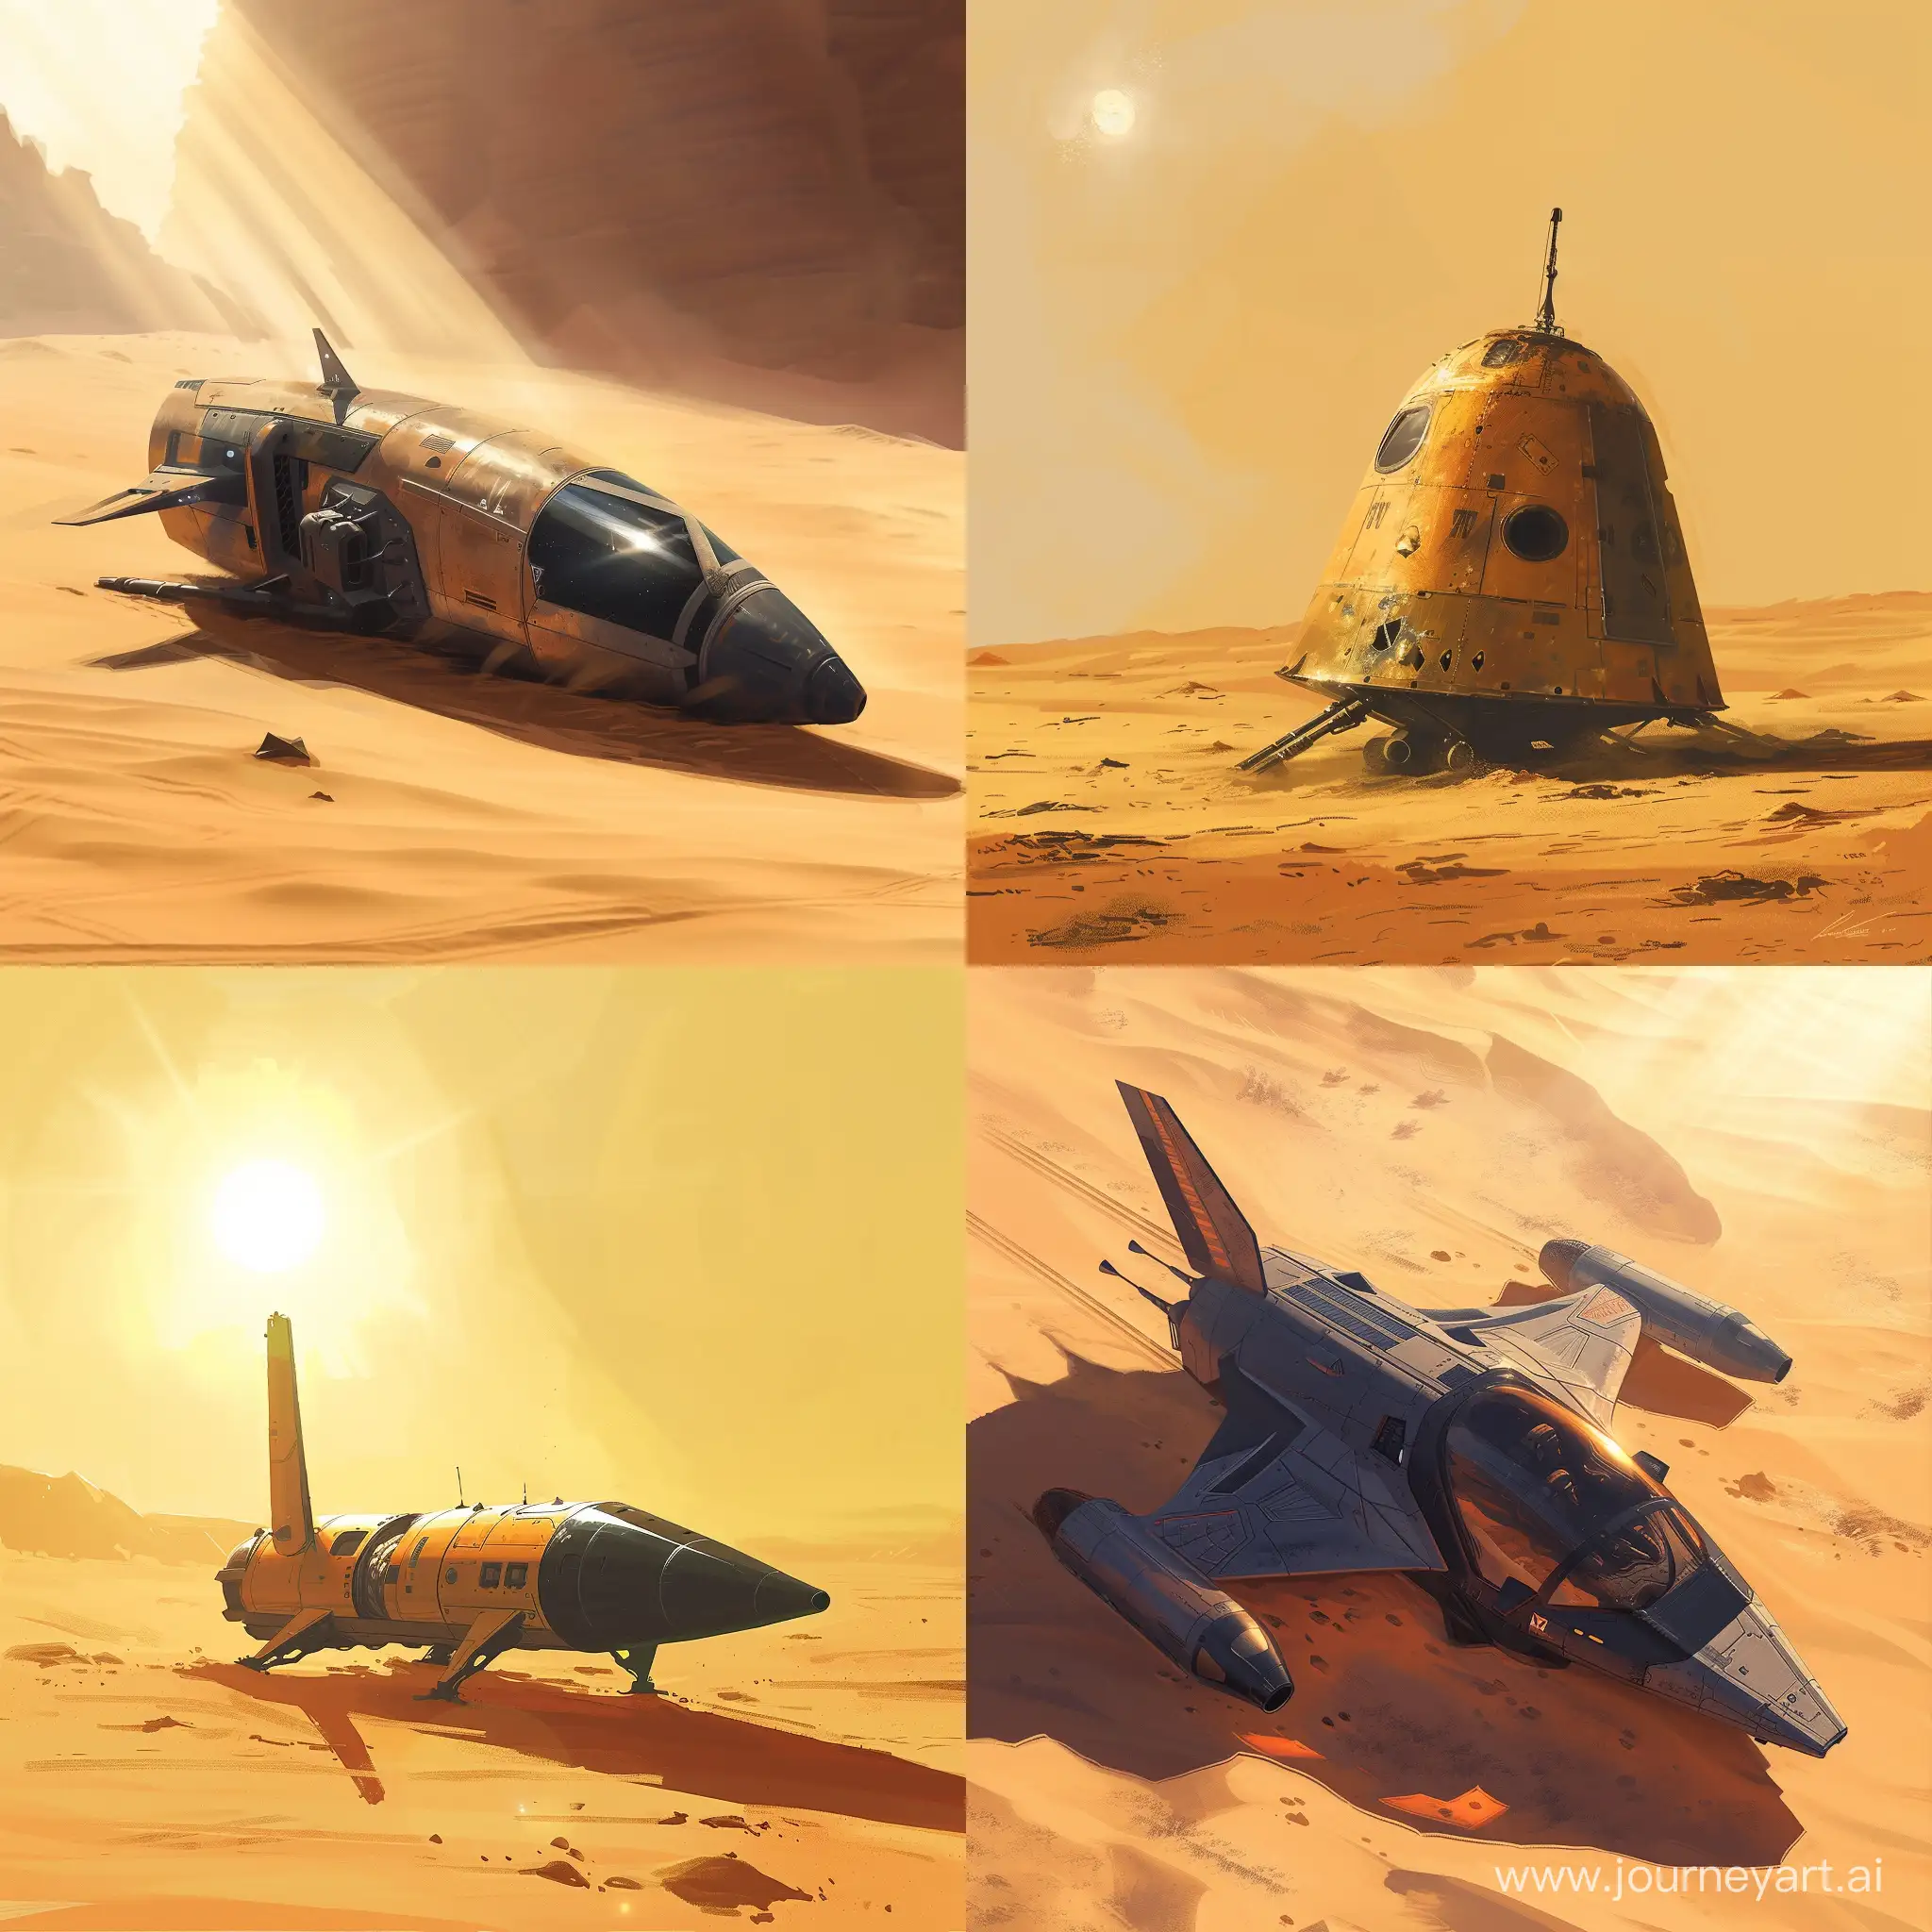  illustration, A small-sized combat spacecraft landed in the desert, sunlight, space fiction